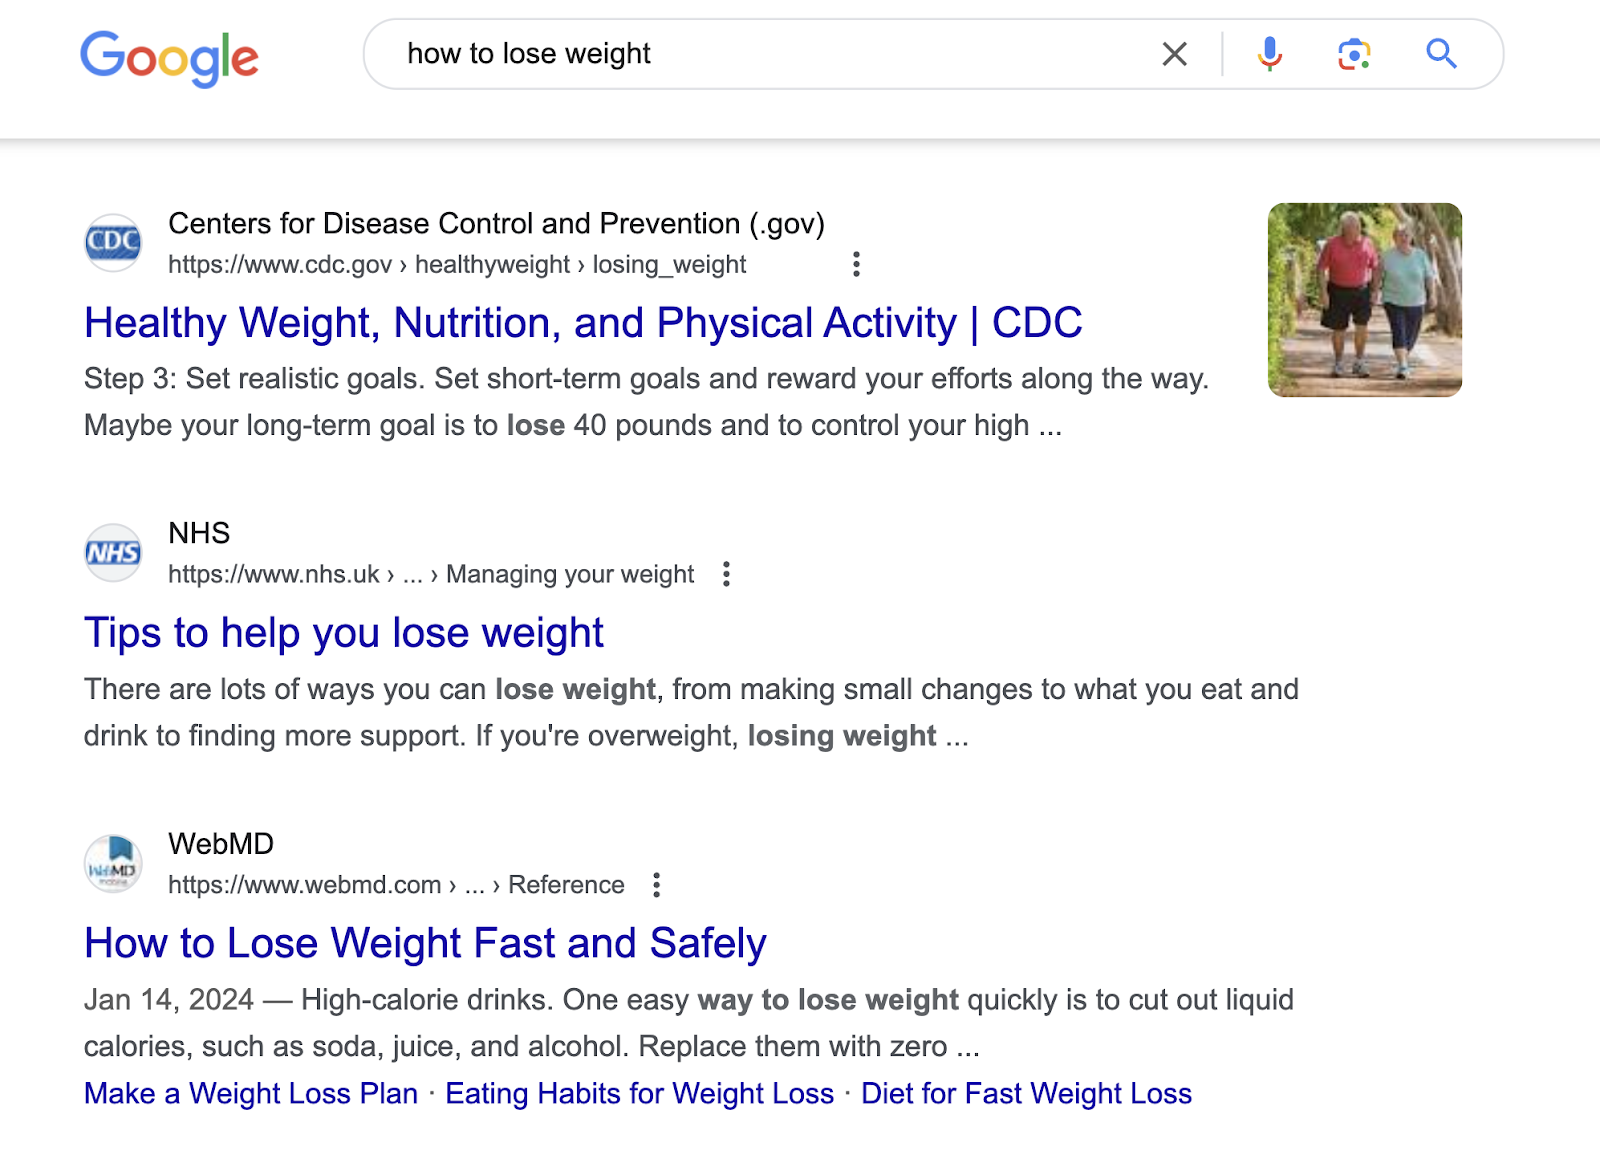 ranking integrated  pages for "how to suffer  weight" are from the CDC, NHS, and WebMD